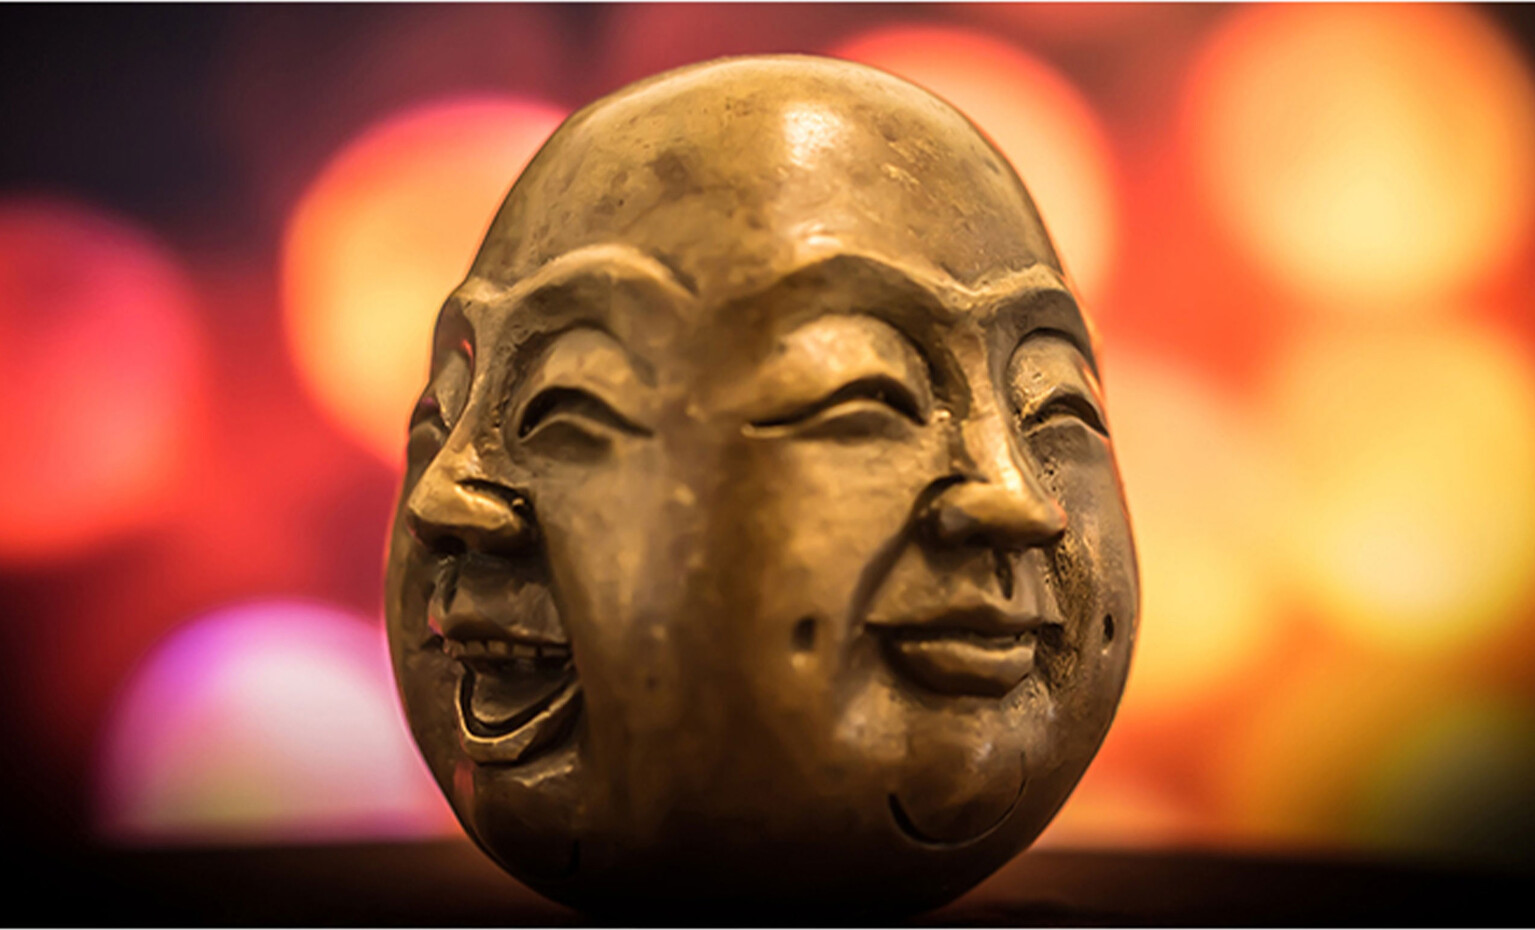 Bright and colourful photograph of a Buddha statue. The statue is almost shaped like an egg and displays four faces of buddha all around its sides (smiling, laughing, crying, angry).